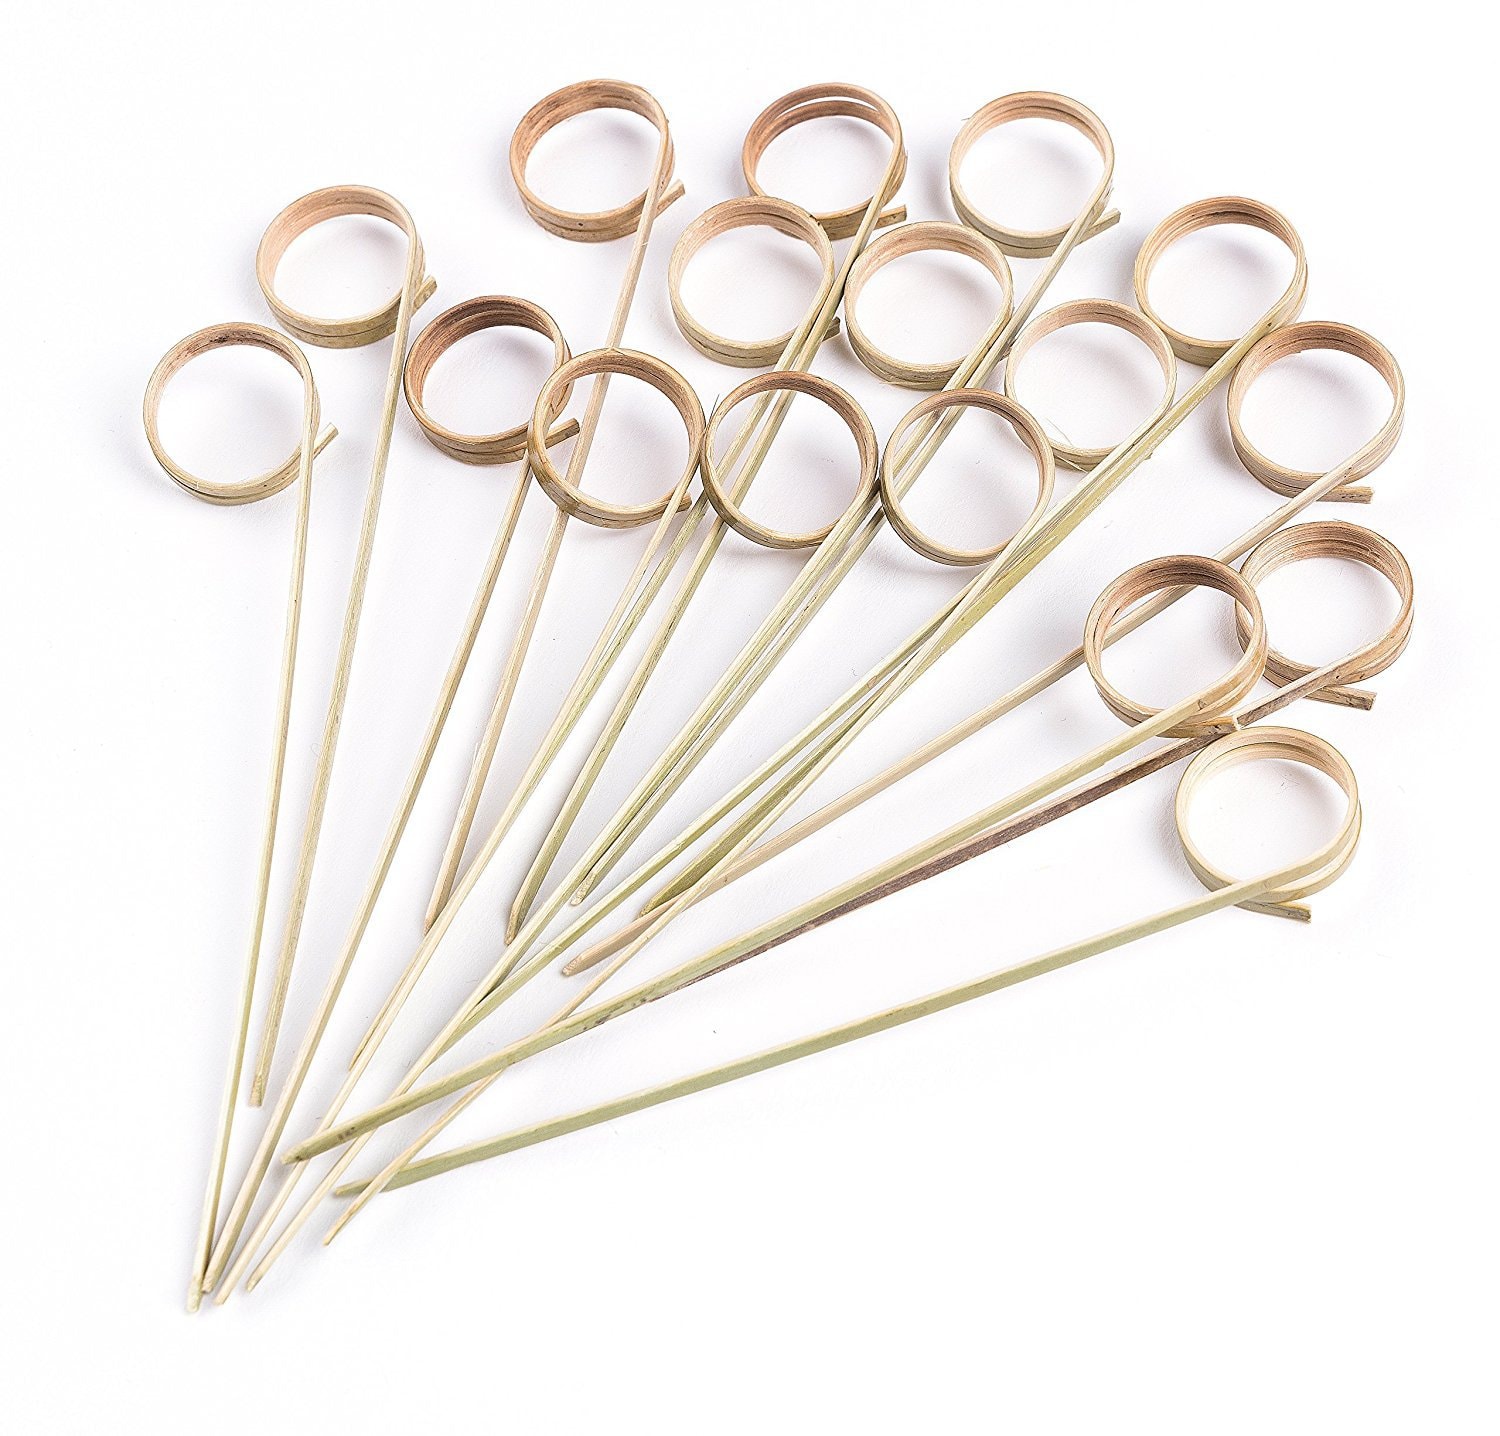 Cocktail Picks Handmade Bamboo Toothpicks 4.7” Circle Knotted in 100 Counts